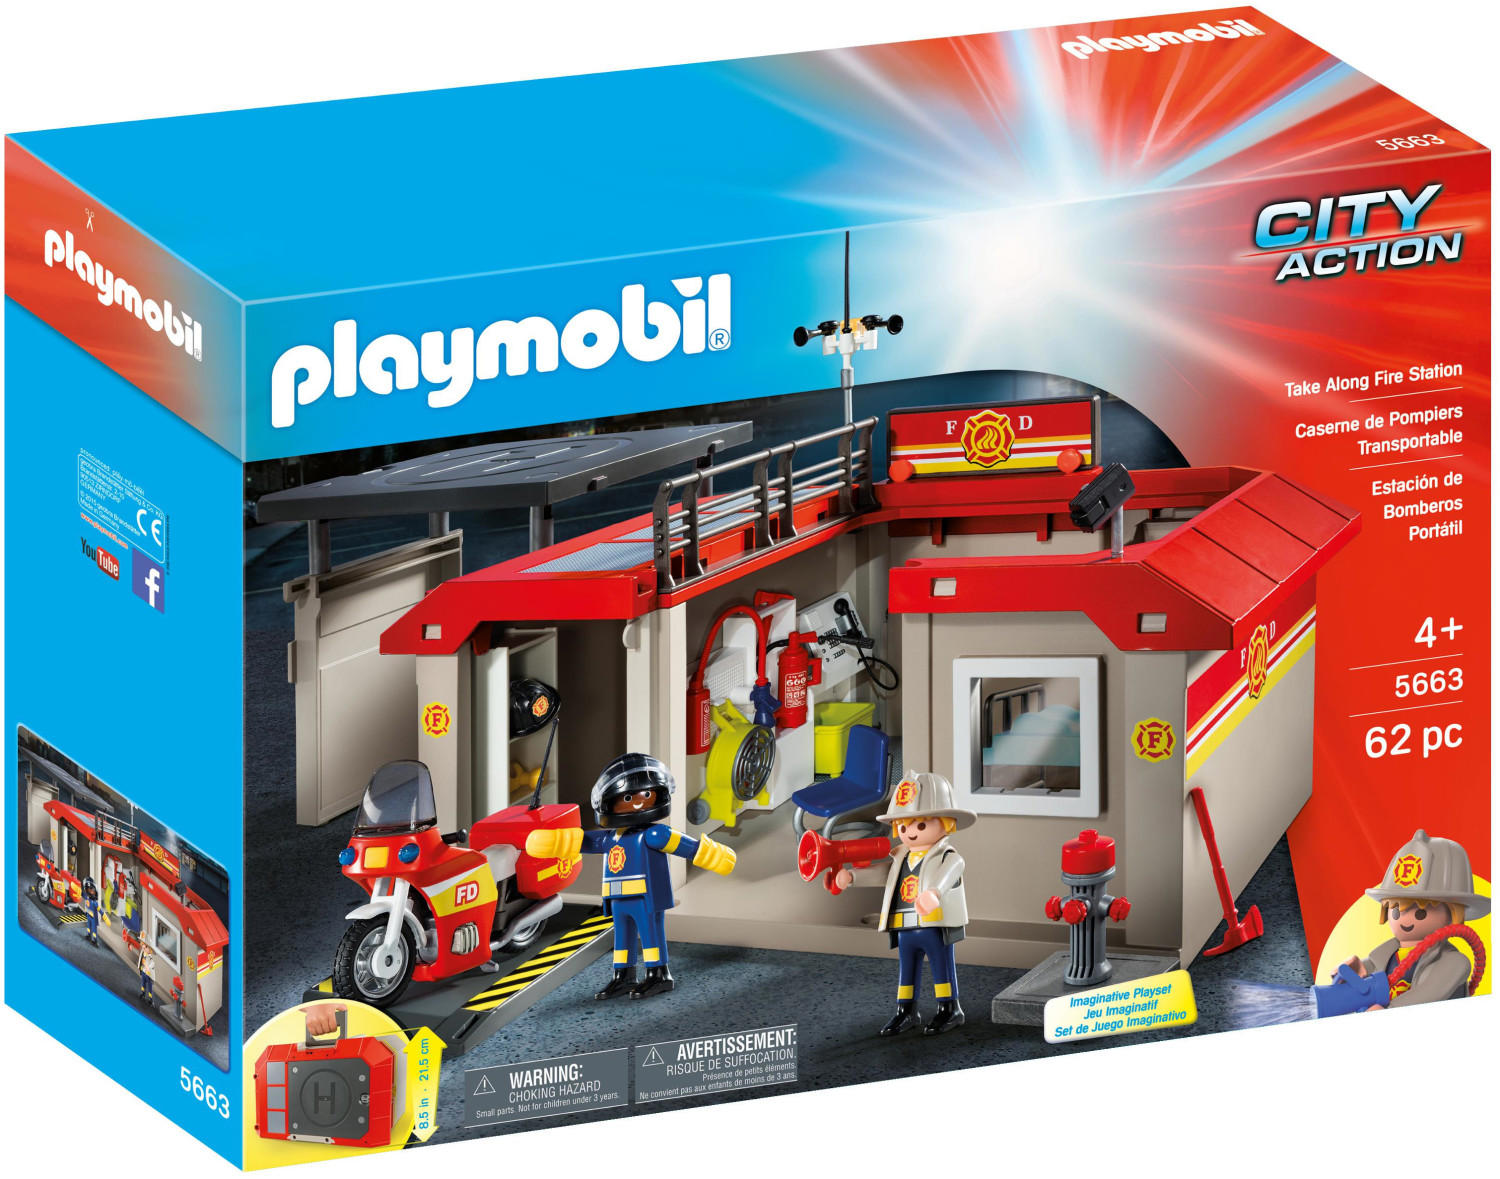 Playmobil City Action - Take Along Fire Station (5663)